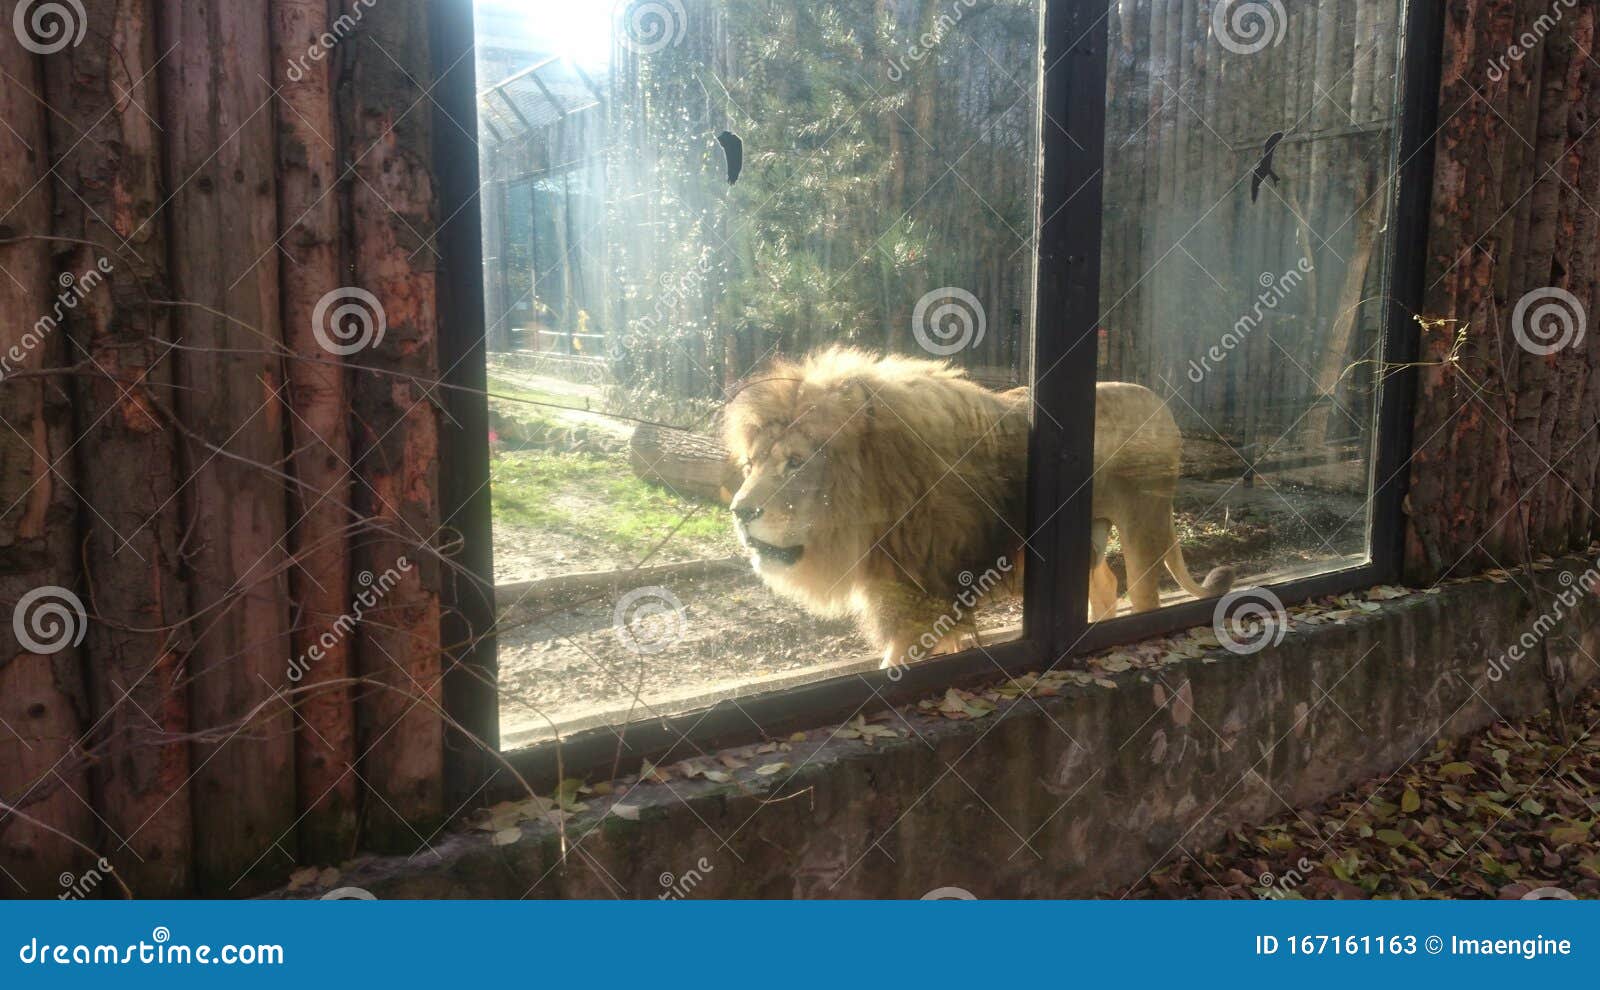 male lion - king of felines at the zoo